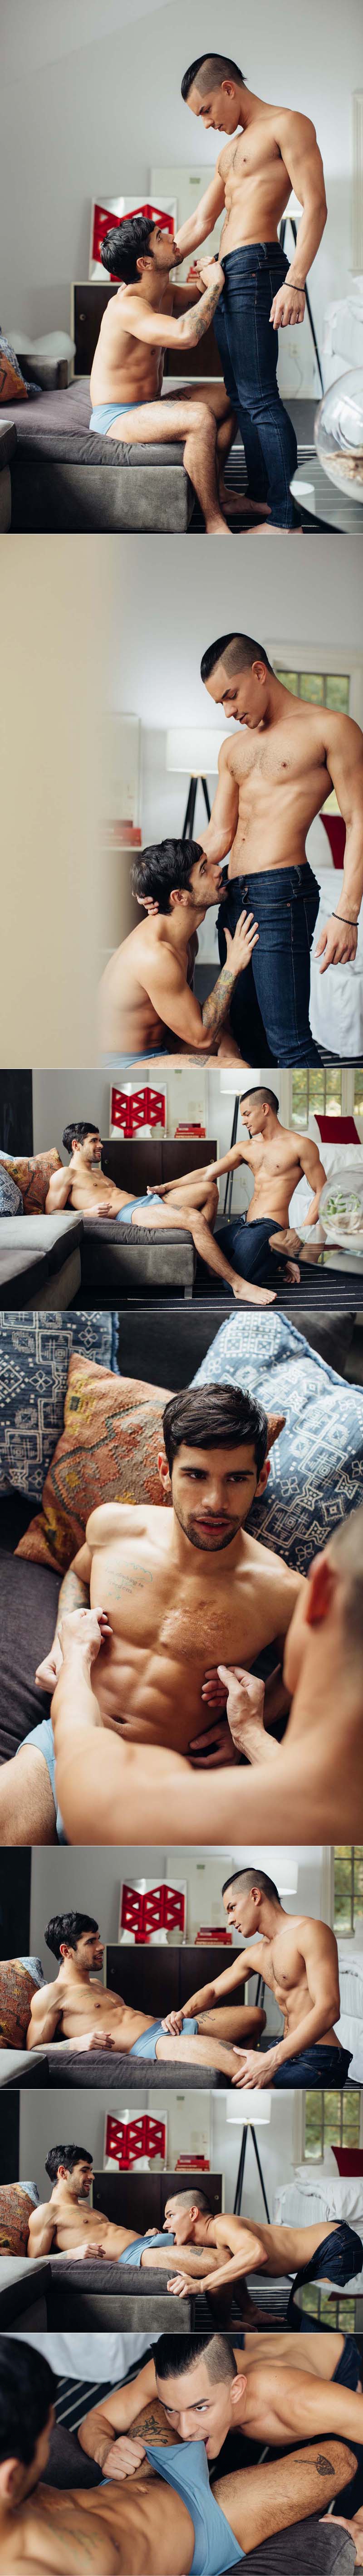 More Before The Afterglow (Ethan Slade Fucks Ty Mitchell) at CockyBoys.com